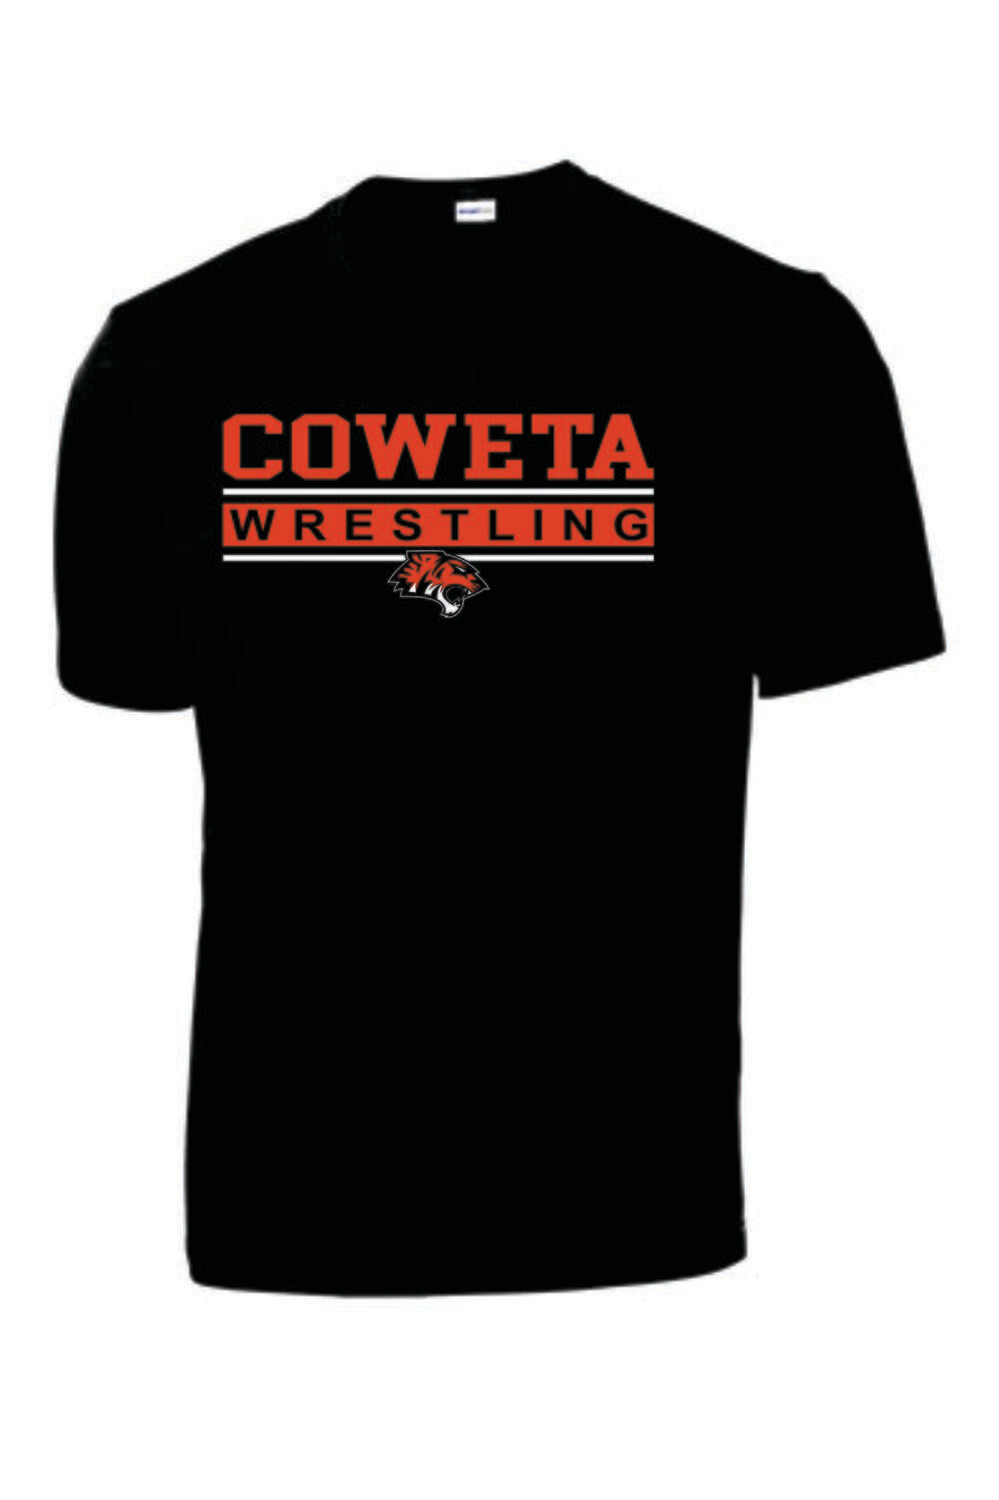 Sport-Tek® PosiCharge® Competitor™ Tee - Adult/Youth. *TEAM GEAR SHIRT* Wrestlers will receive a drifit with this logo